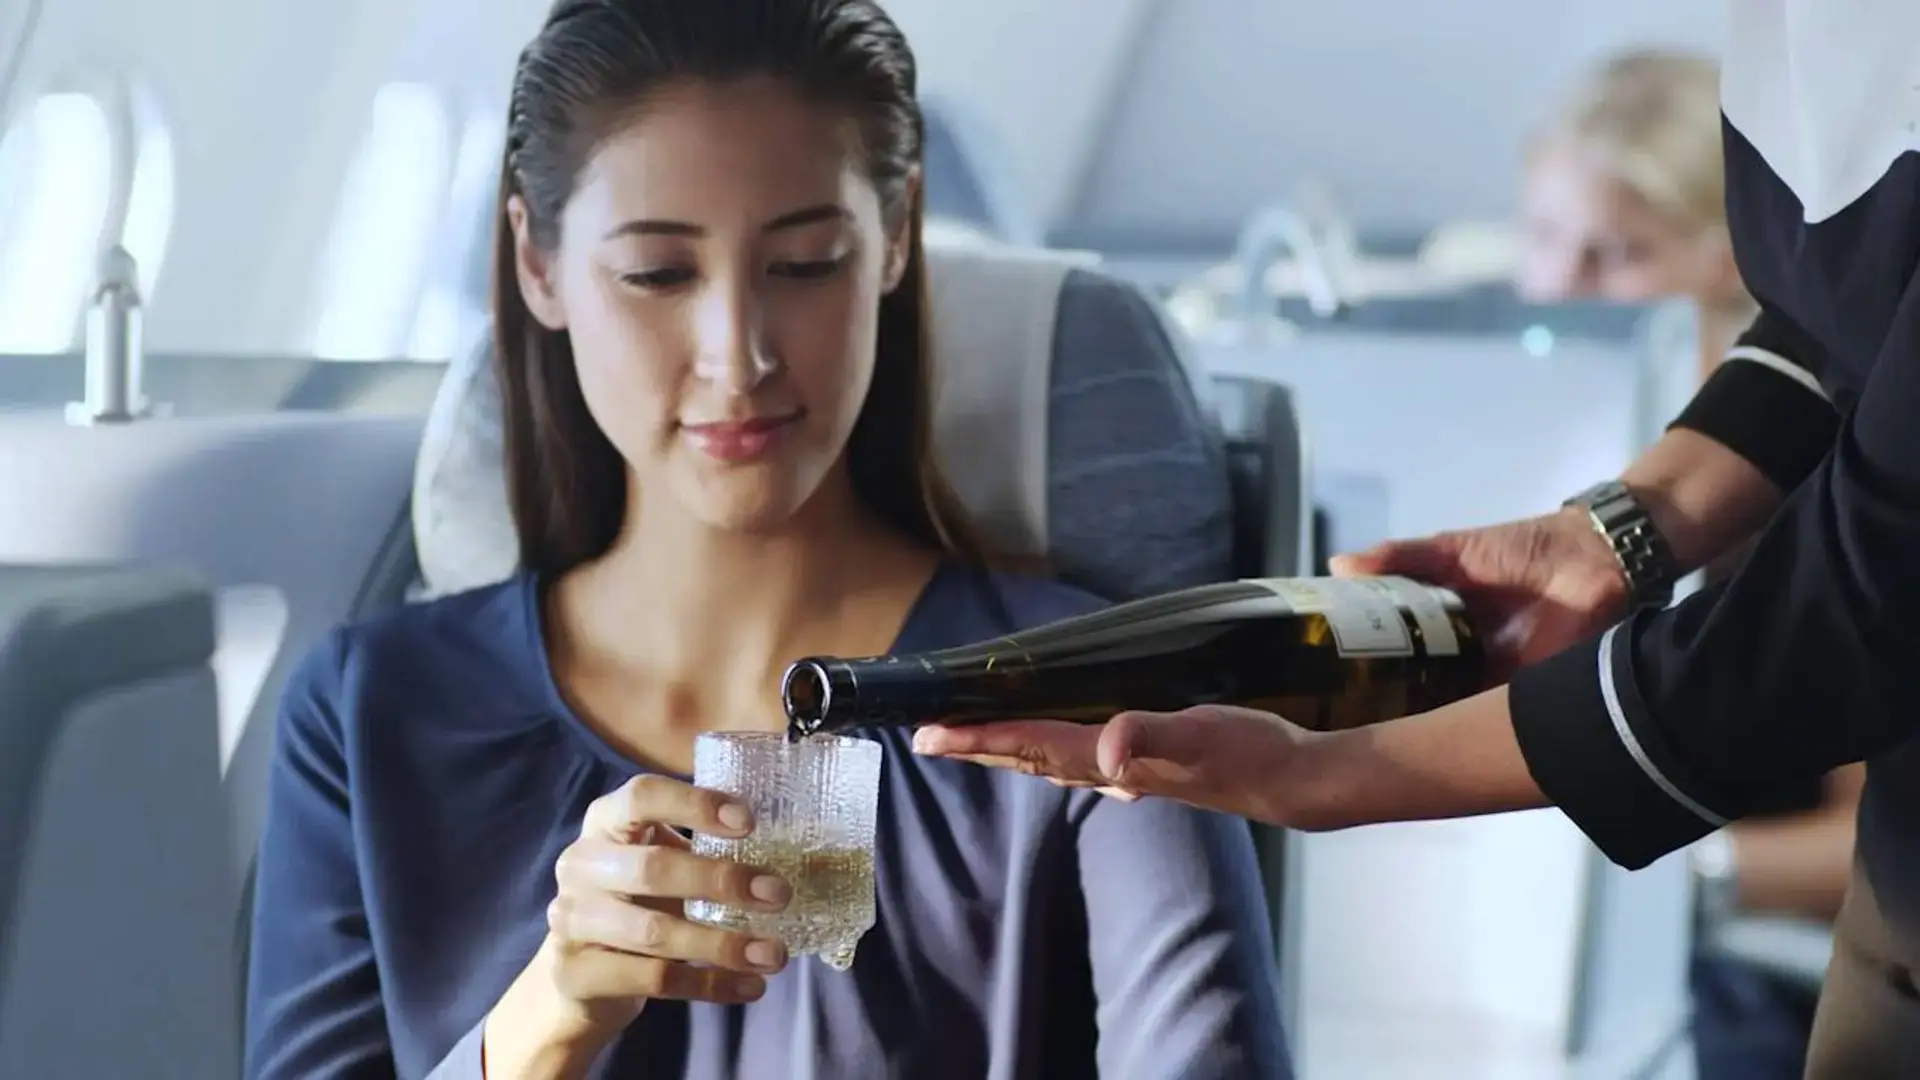 Airlines Articles - 11 Business Class Travel Tips to Help Make Your Experience Perfect!